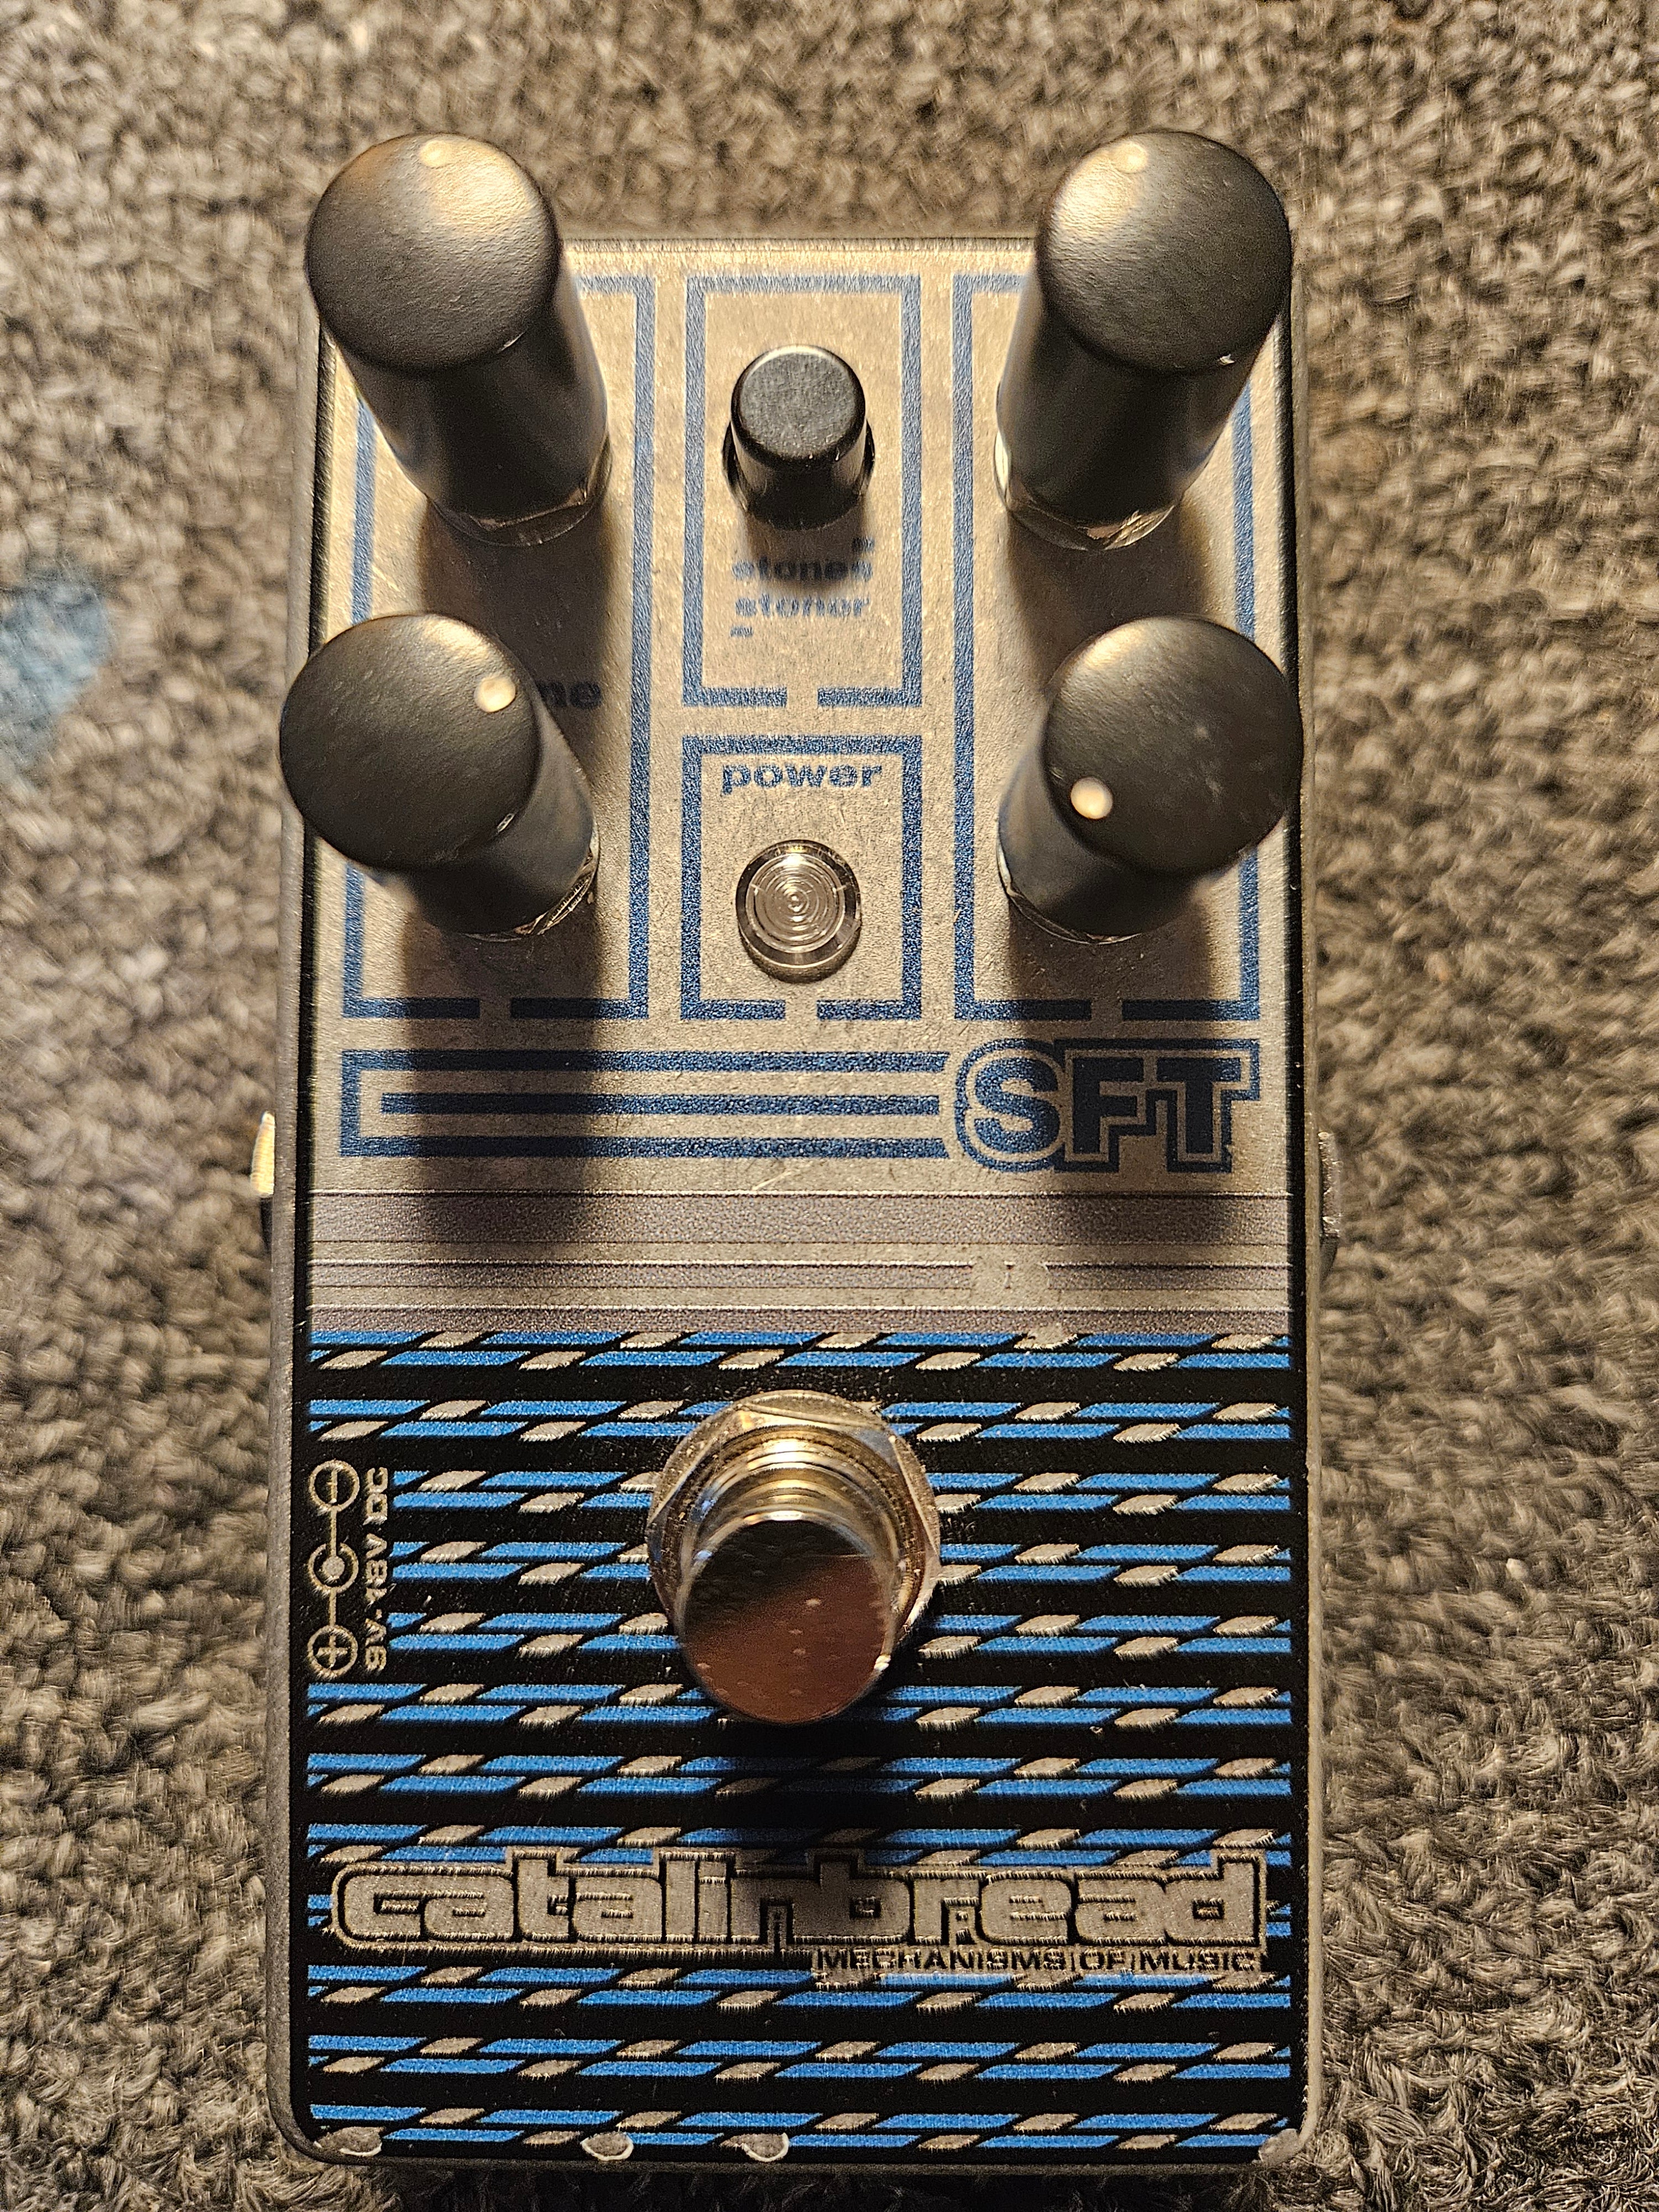 USED Catalinbread SFT Ampeg Inspired Overdrive Pedal